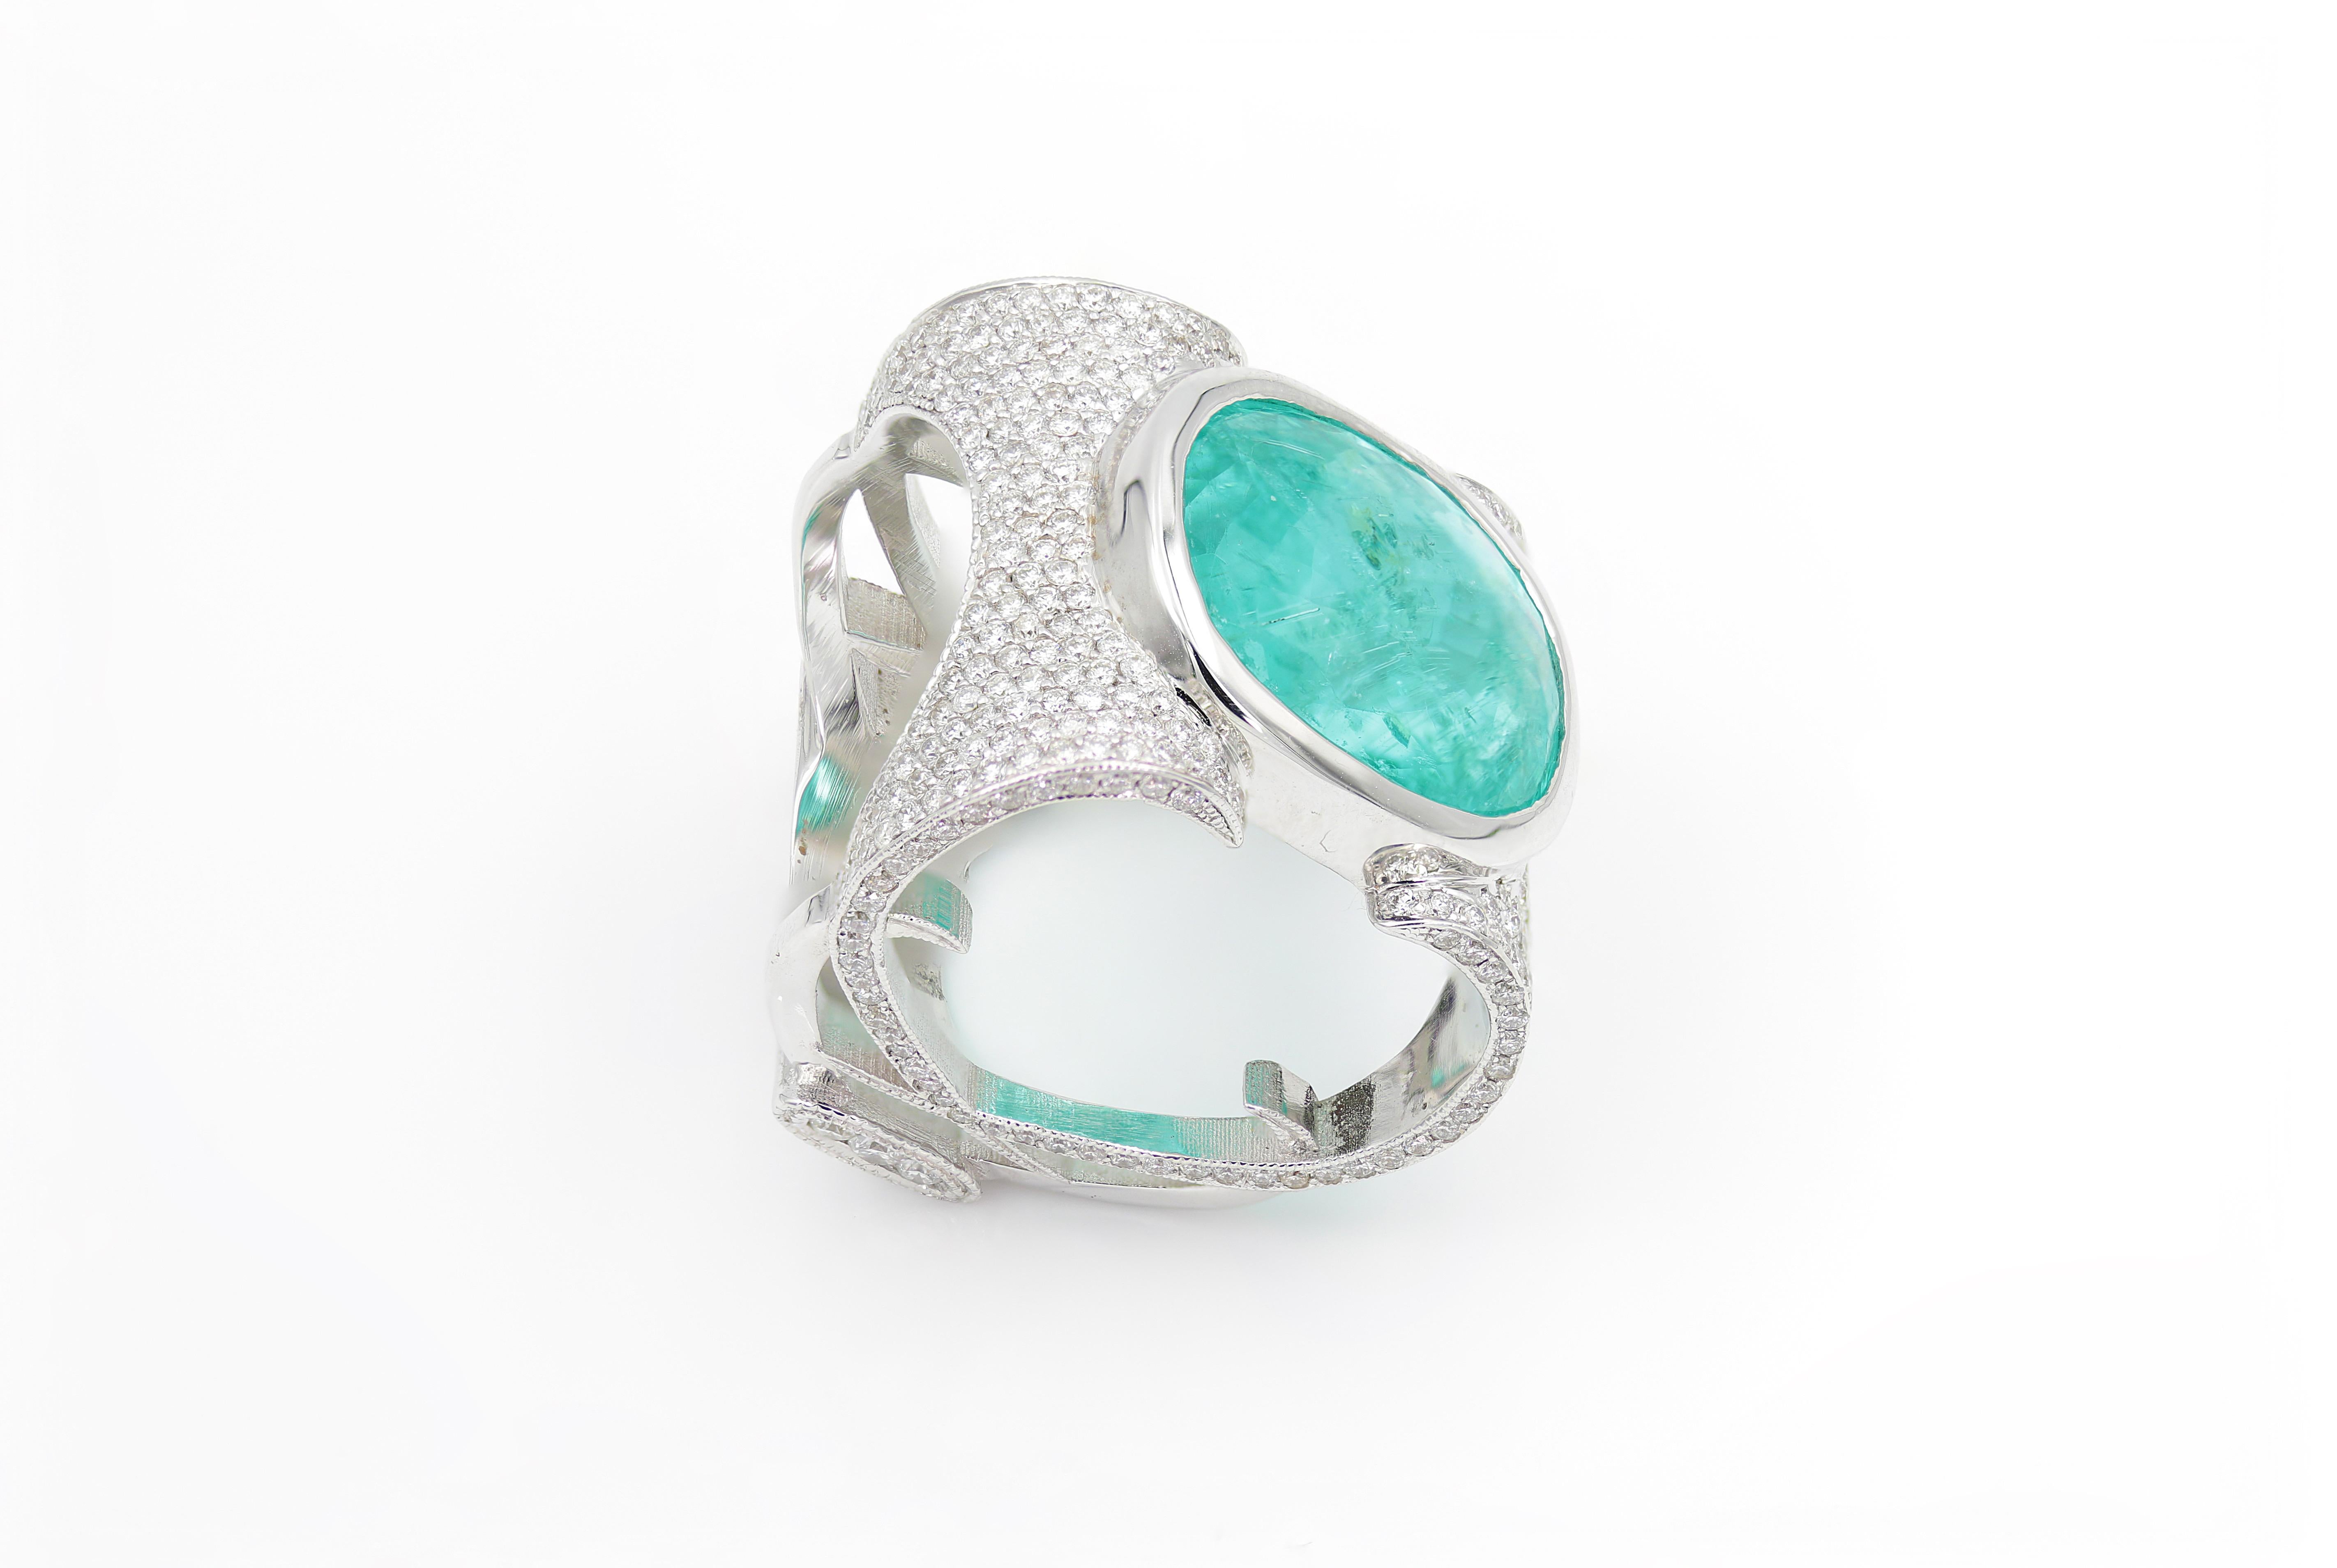 Elevate your evening look with this stunning cocktail ring! Set in a bezel setting with a 14k White Gold band is a rare 18mmx15mm 14.98 carat Paraiba Tourmaline gemstone with an oval cut. The decorative band is encrusted with approximately 400 G